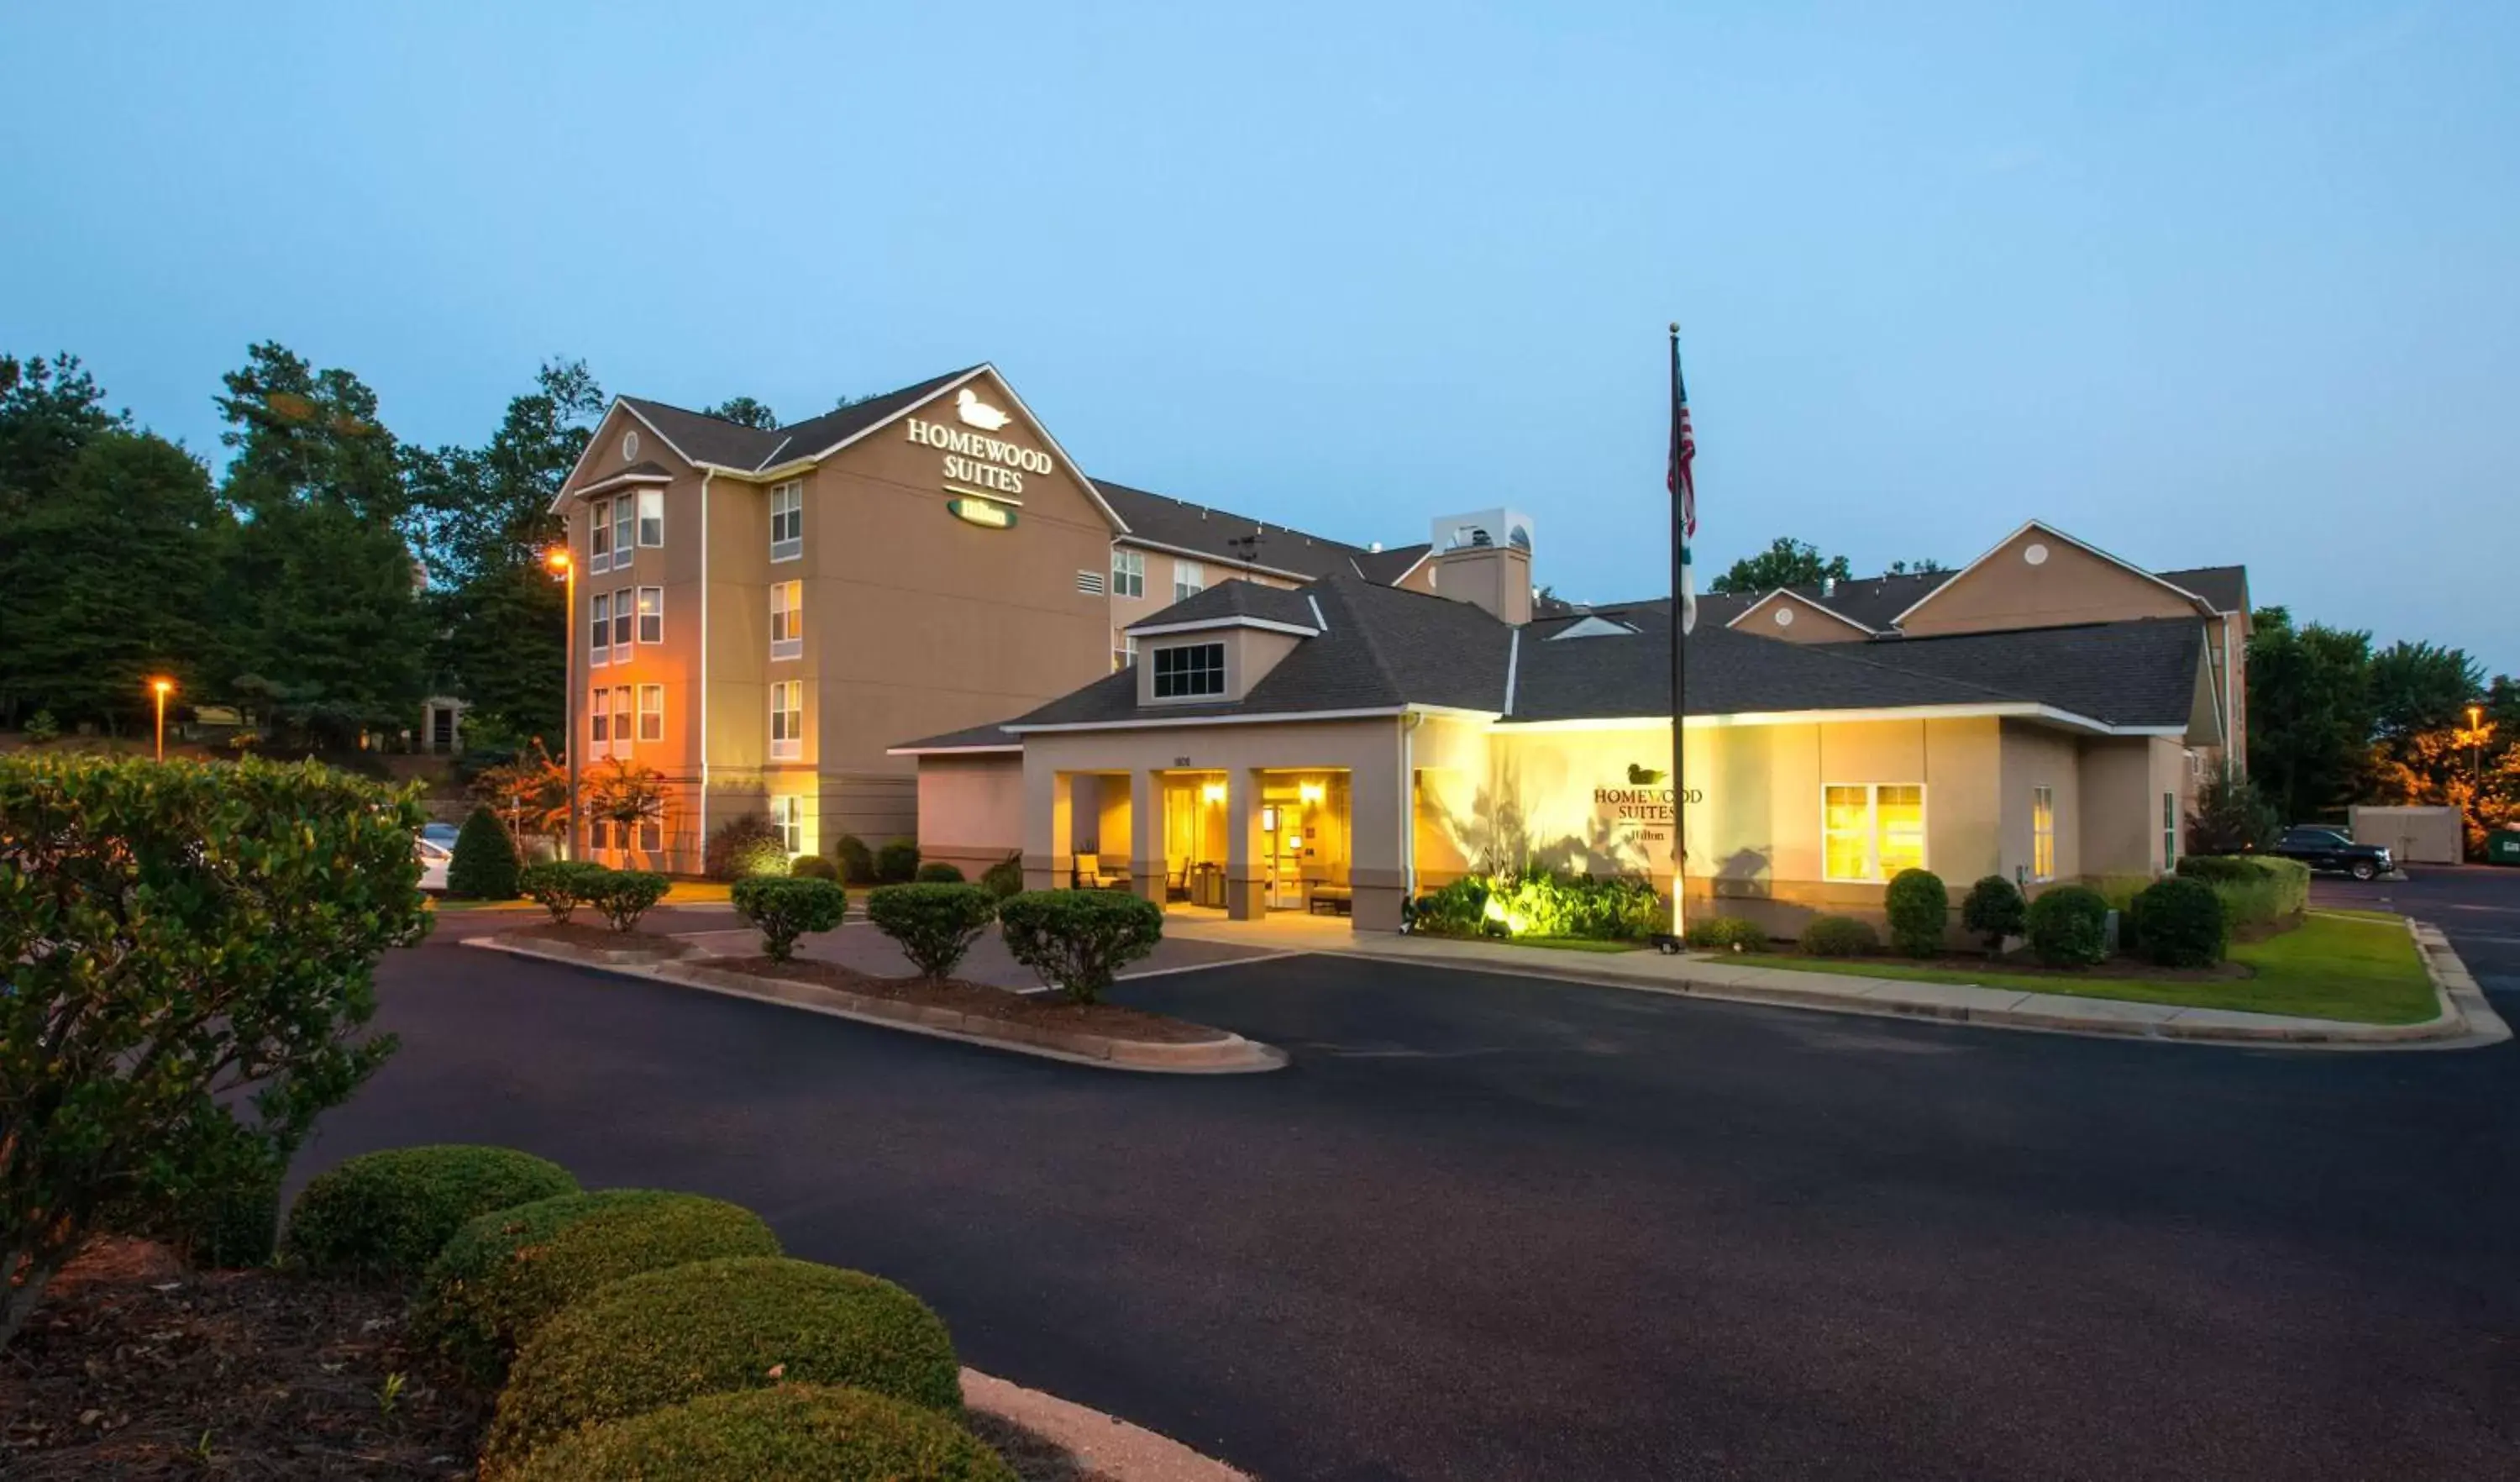 Property Building in Homewood Suites by Hilton Montgomery